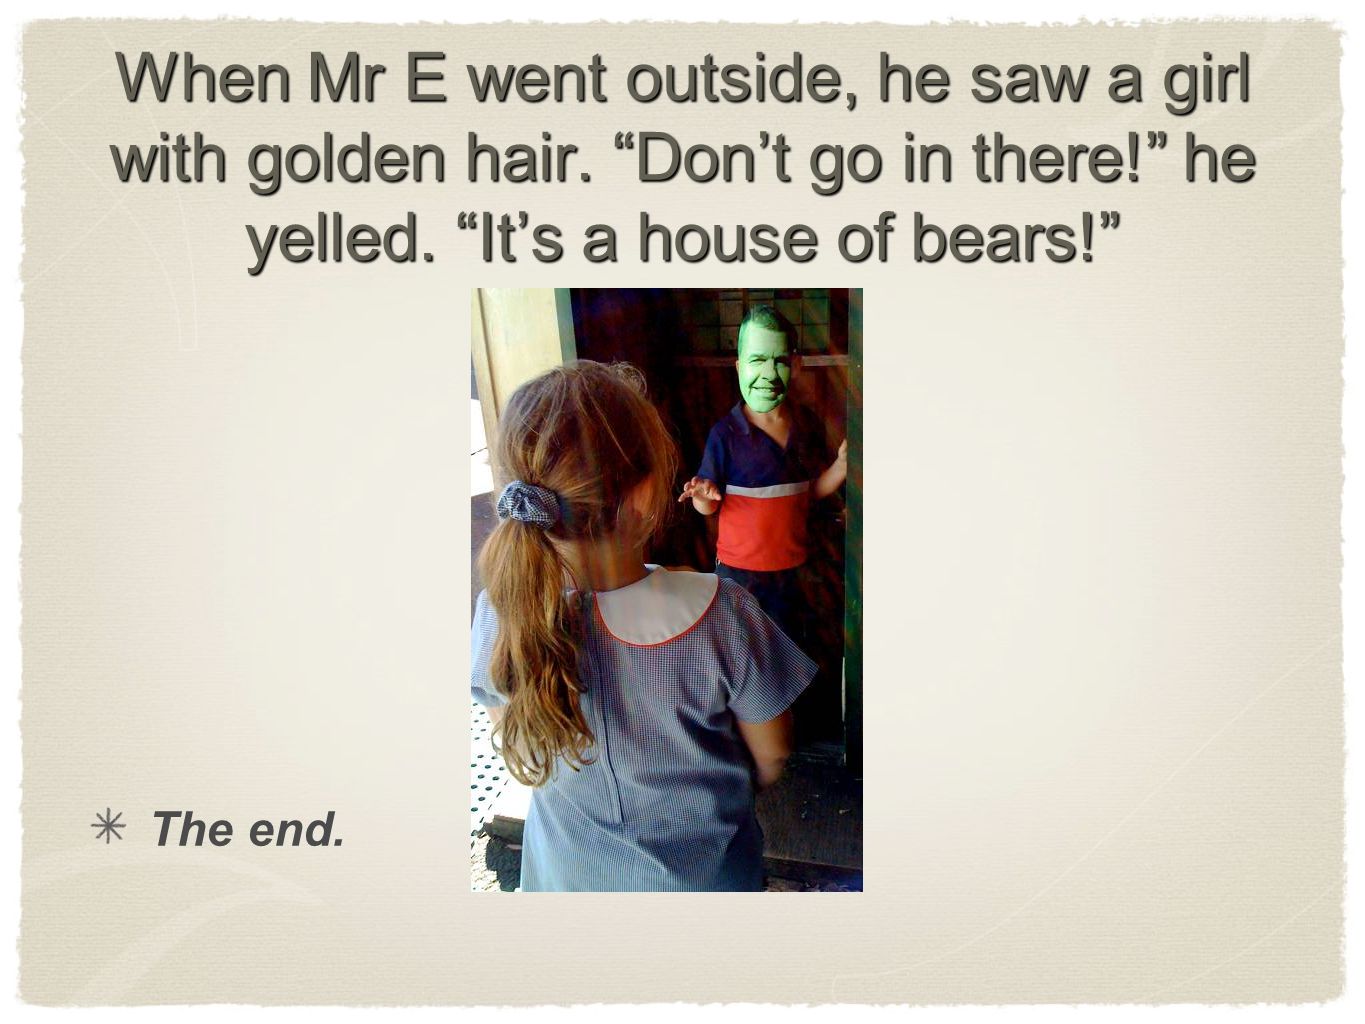 When Mr E went outside, he saw a girl with golden hair.